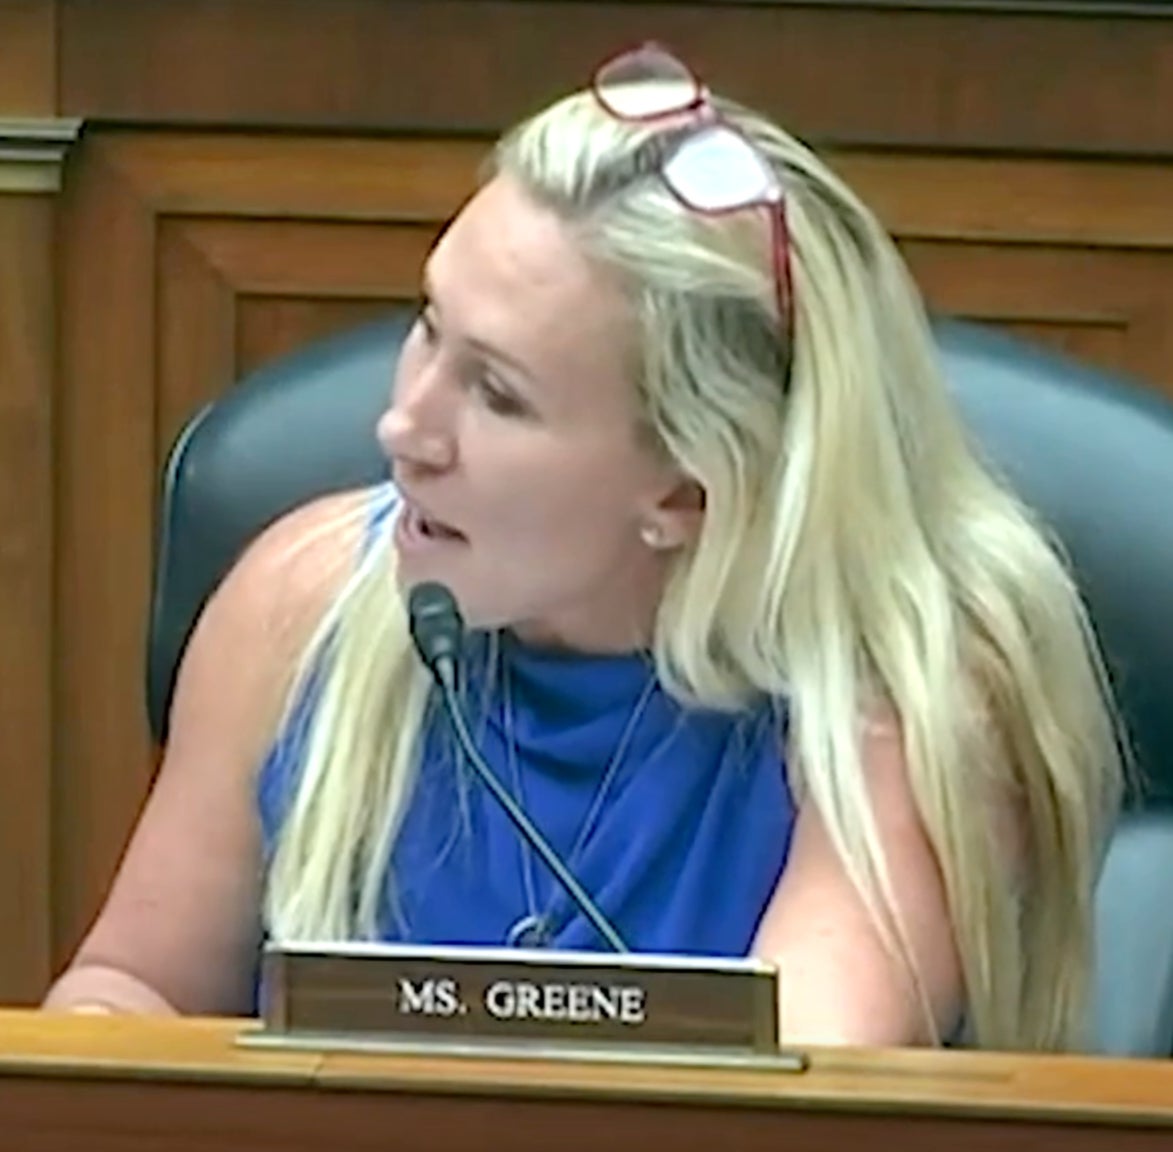 Marjorie Taylor Greene sparred with Alexandria Ocasio-Cortez at a House hearing on Thursday night